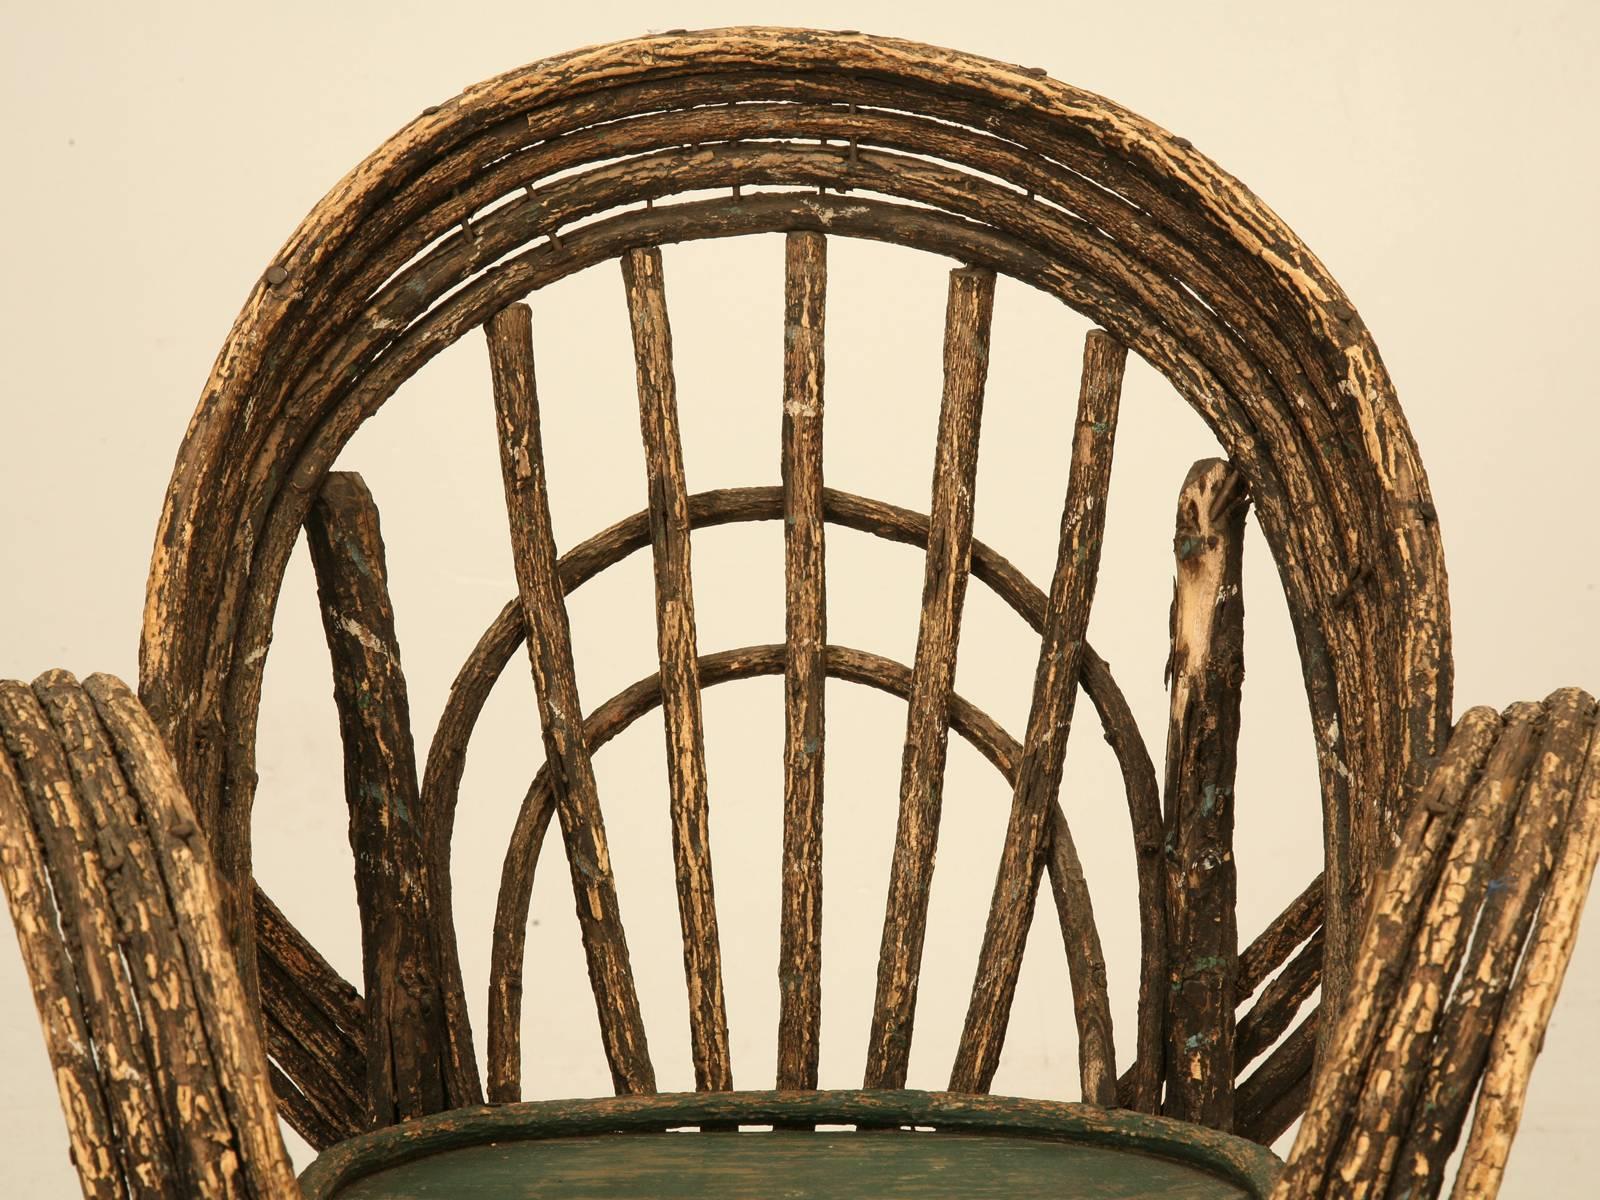 The only real antique bent willow original paint child’s rocking chair I have ever seen, let alone in such nice original unrestored condition. The perfect child’s room decorative accessory. 
Seat height is 8